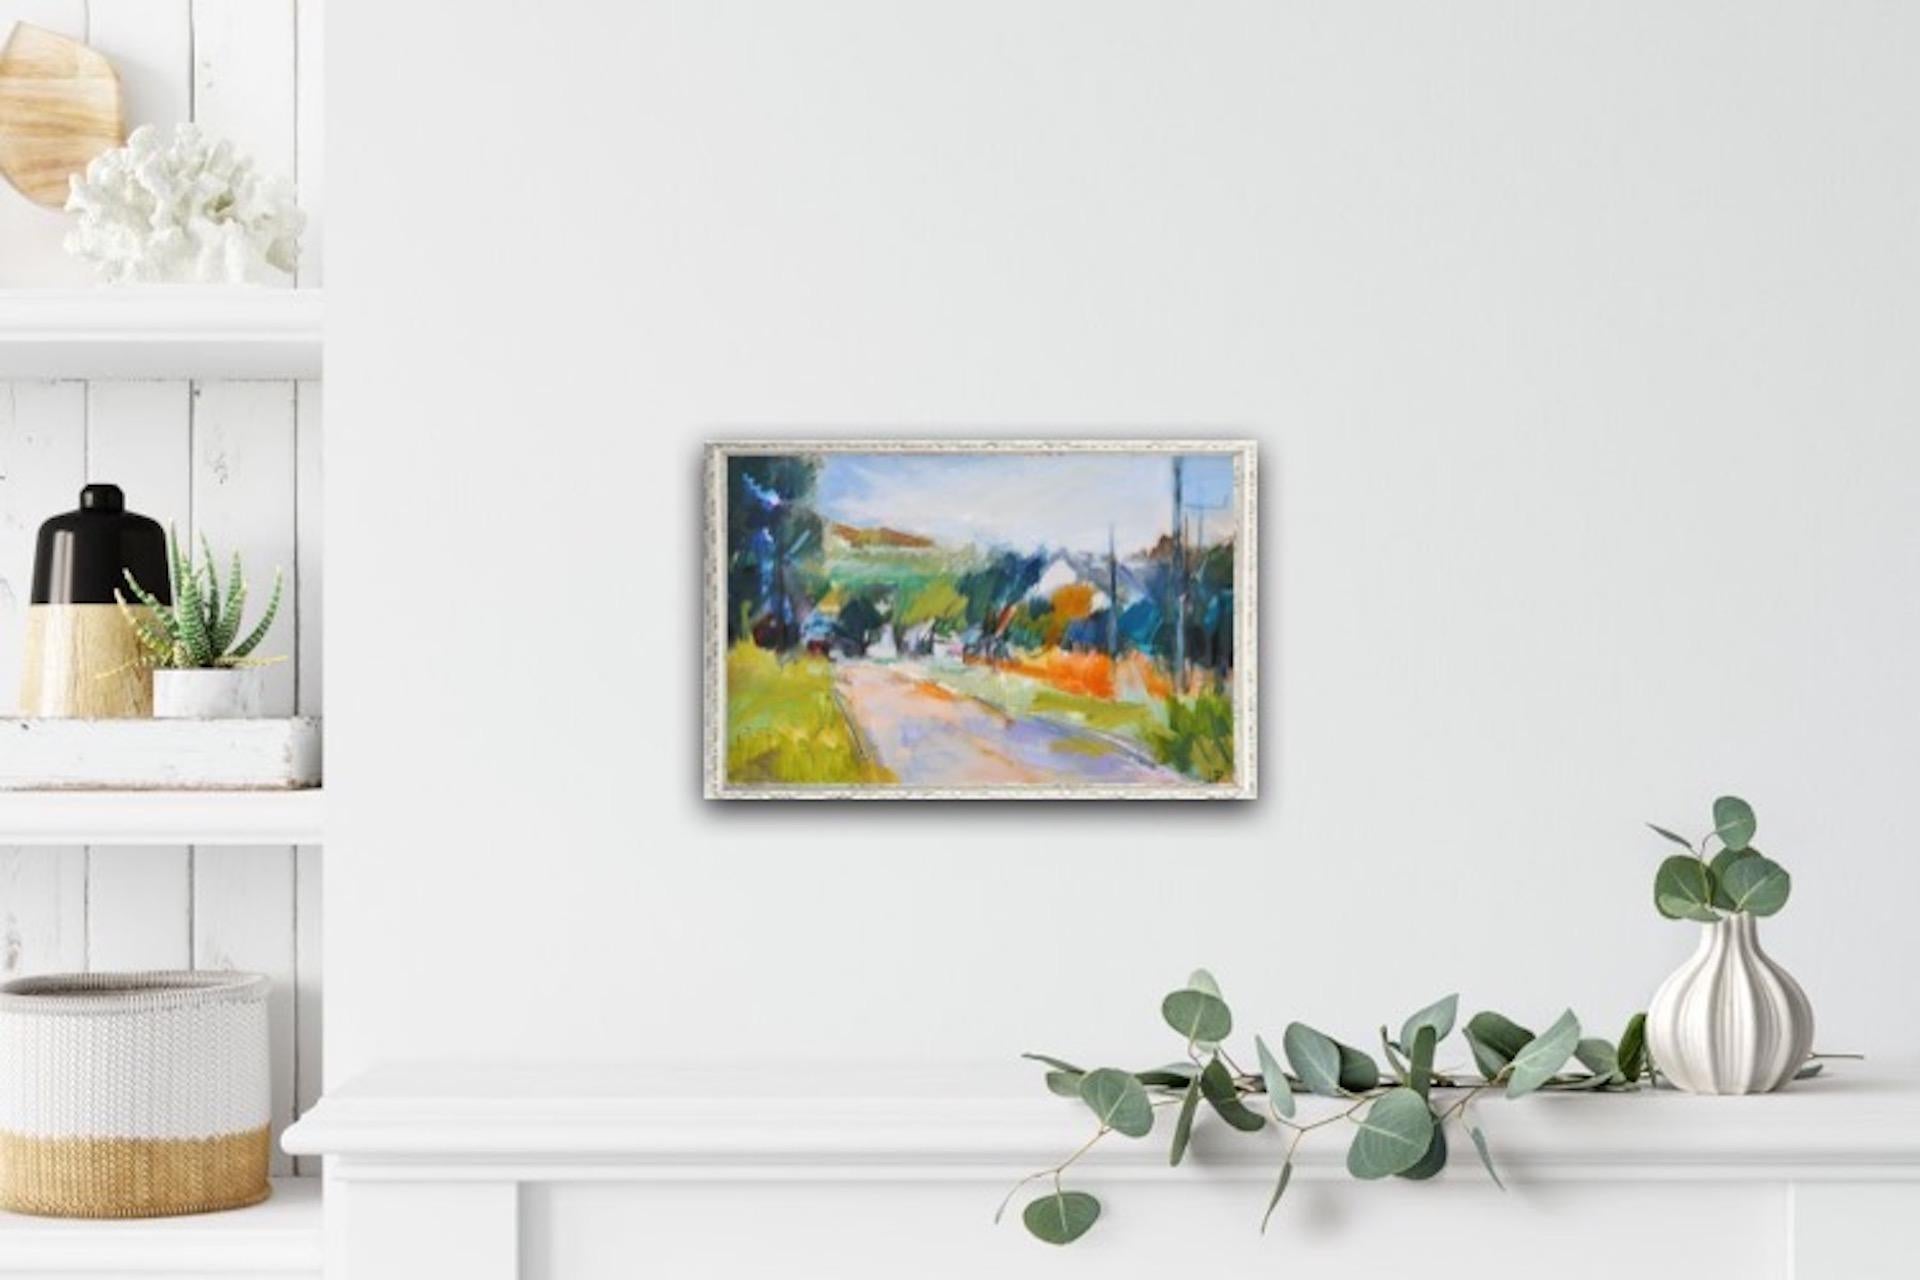 Lucy Powell, The Road to the Studio, Original Expressionist Landscape 1